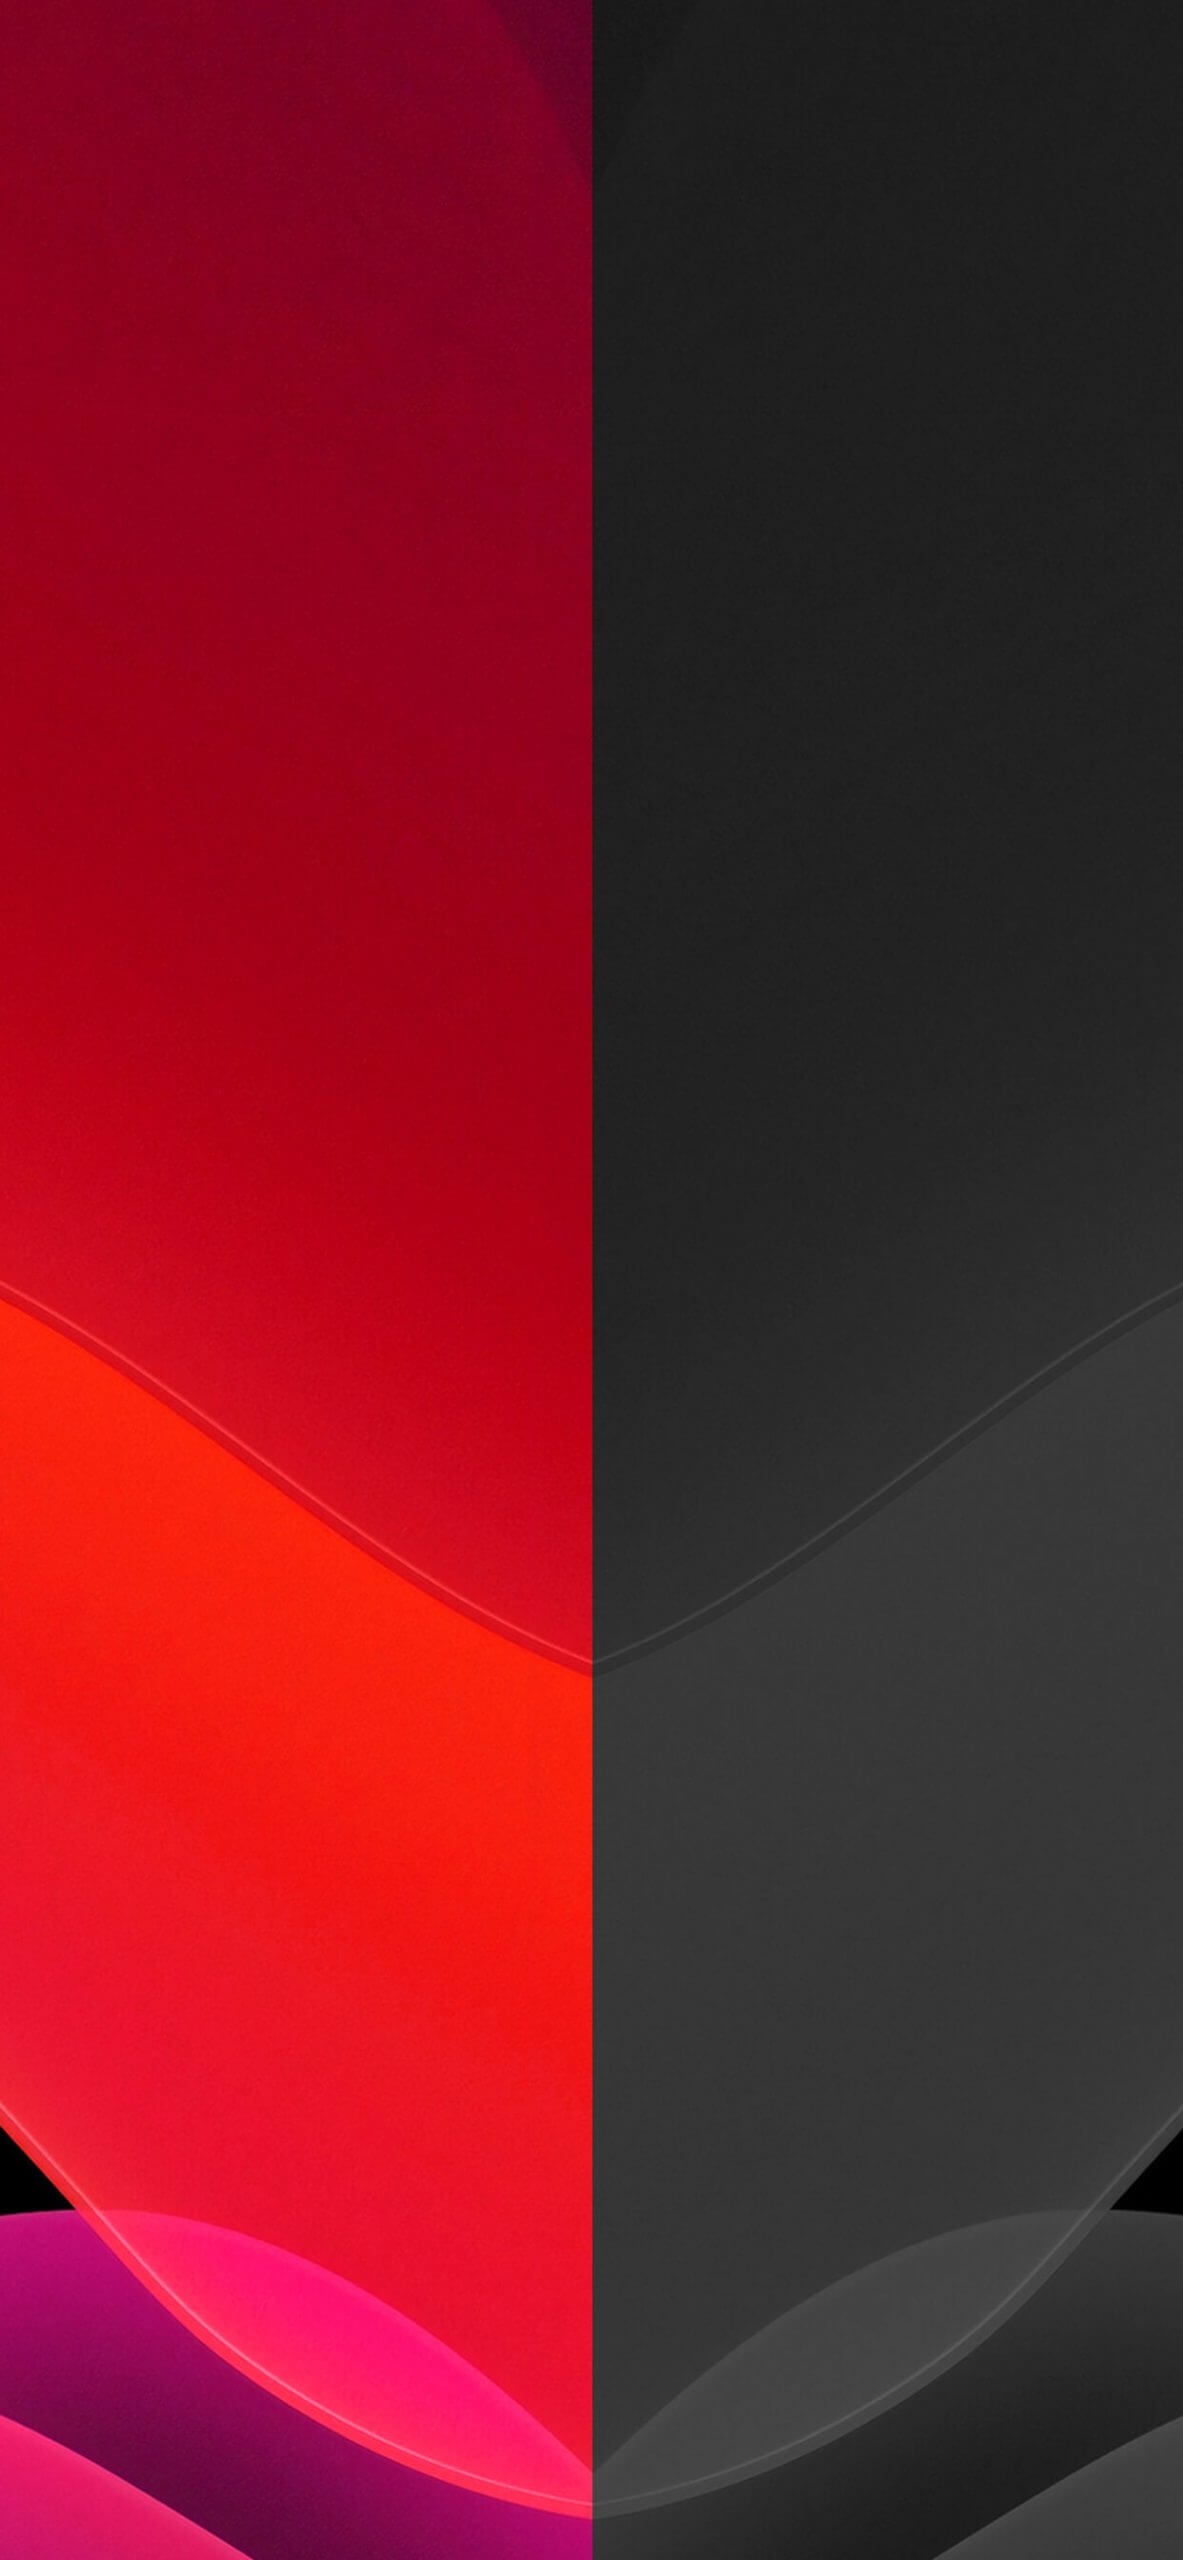 red or black? can't decide